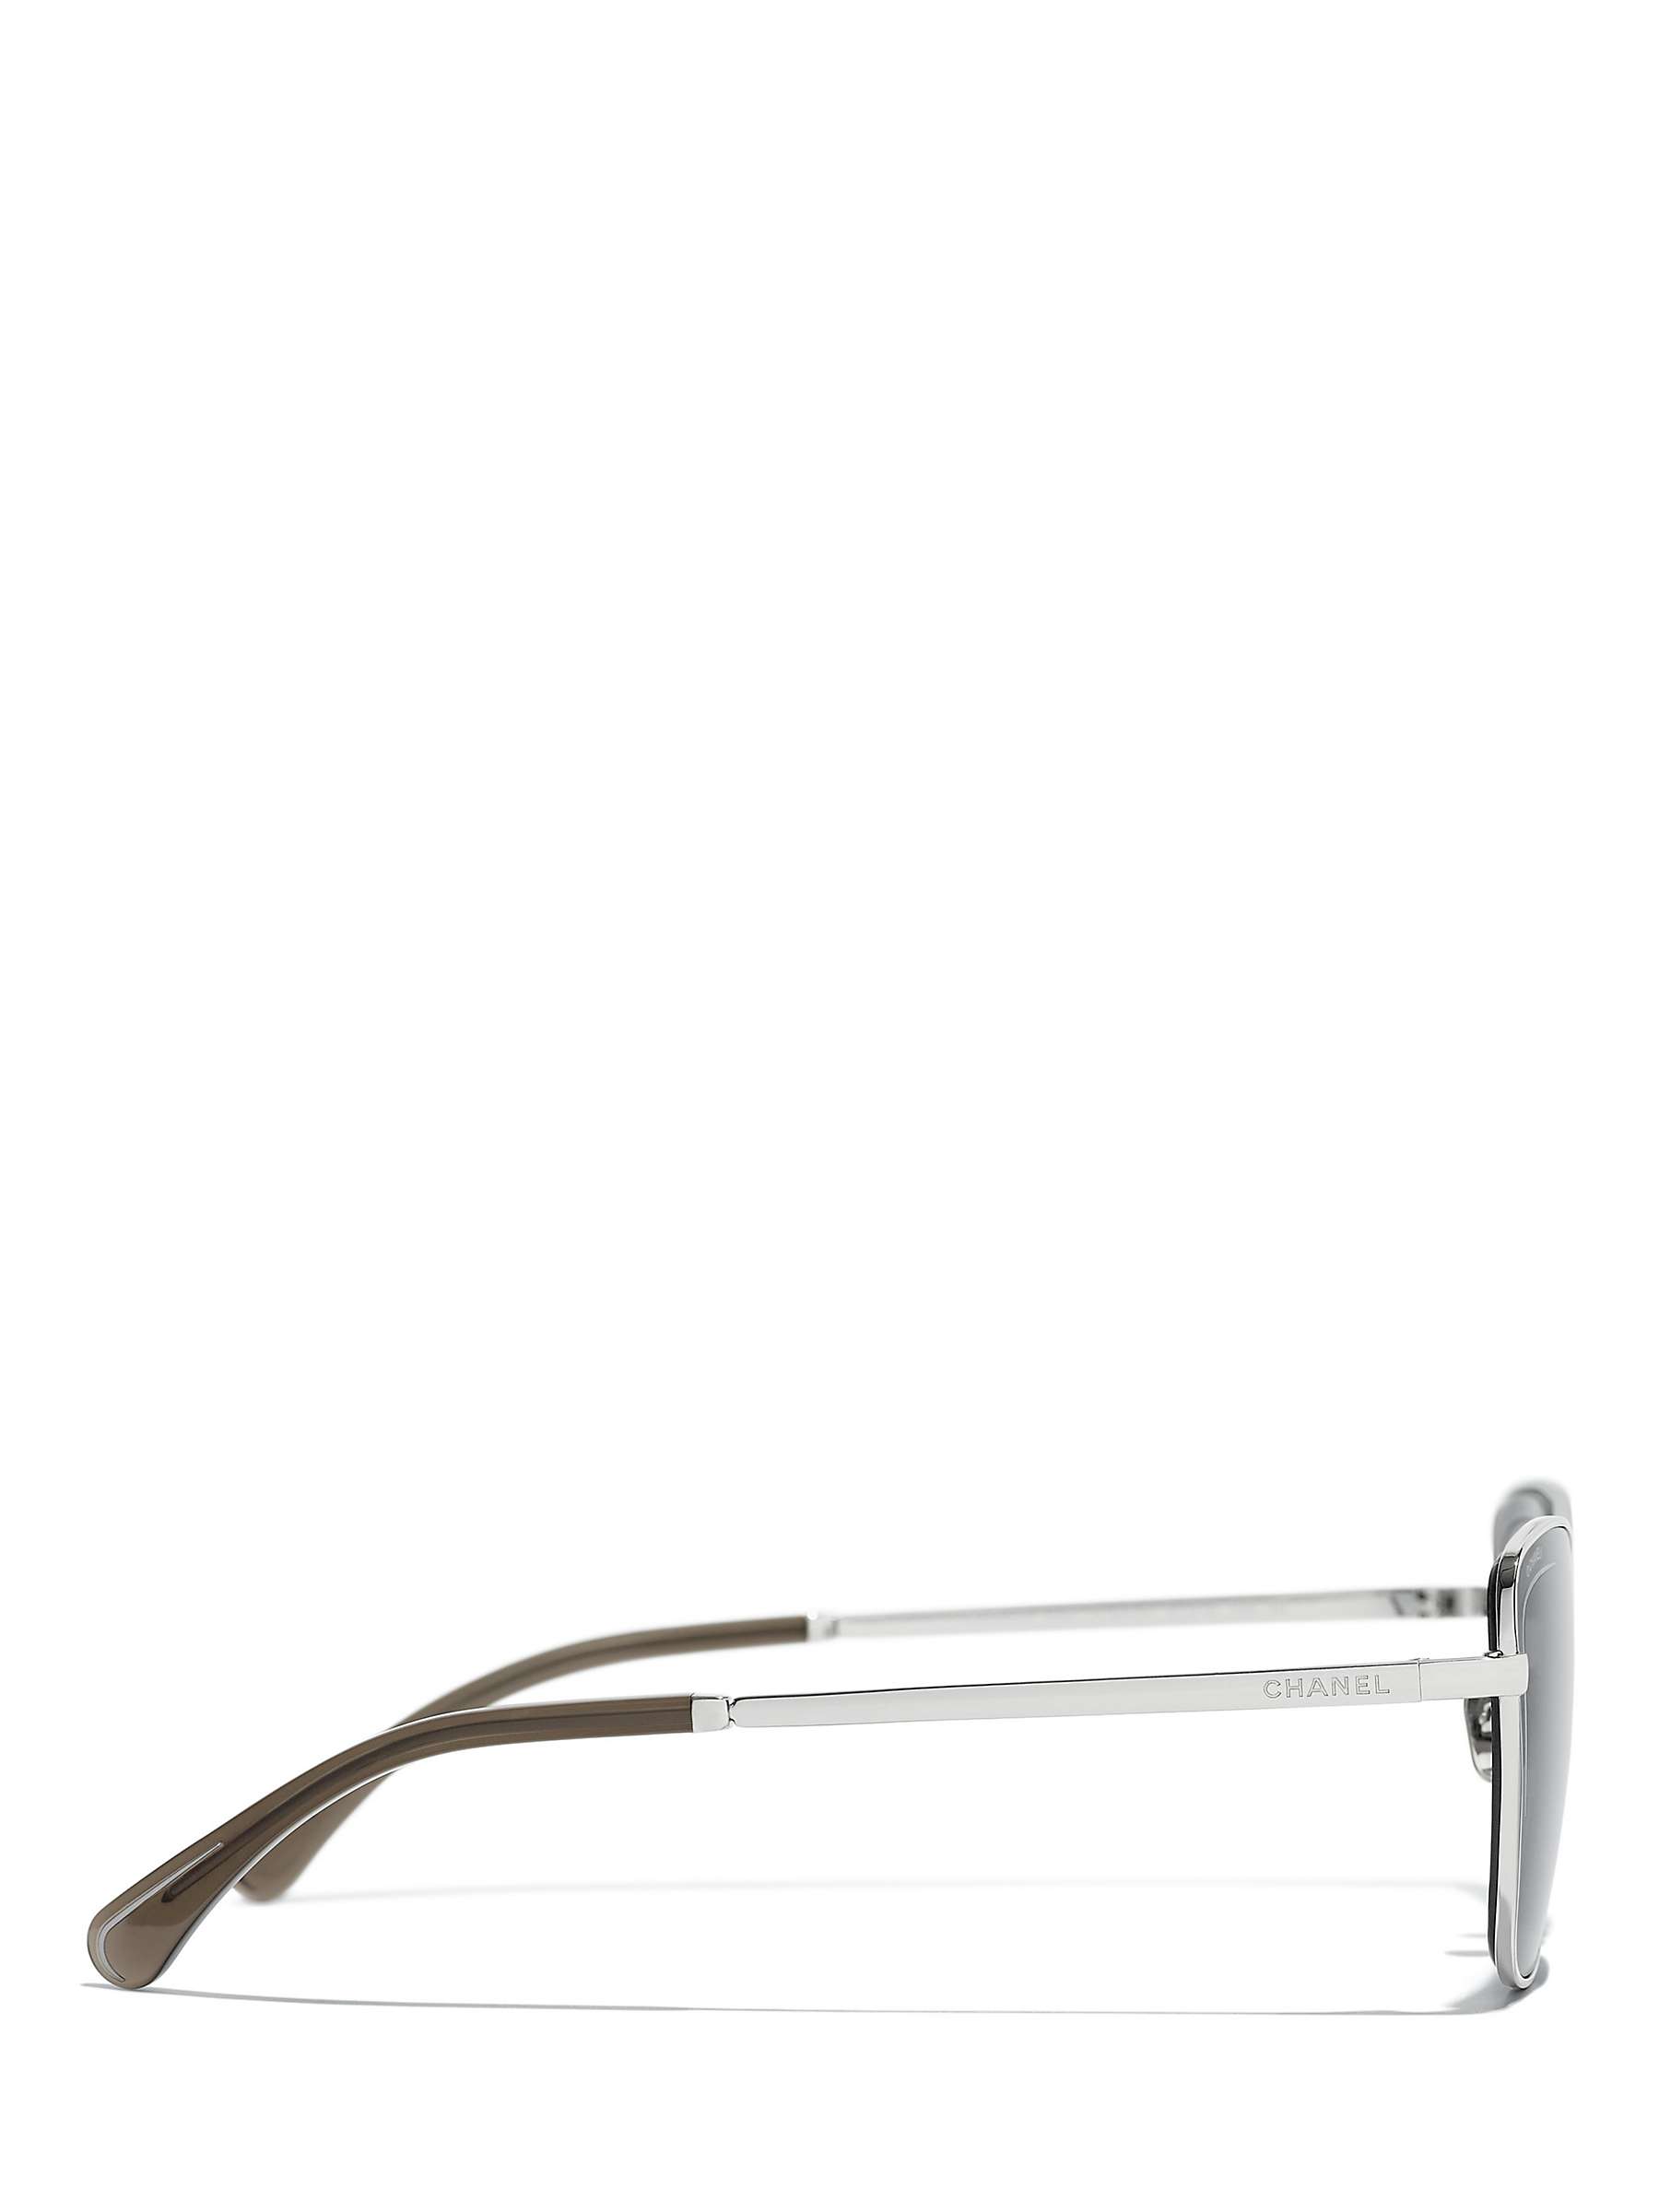 Buy CHANEL Rectangular Sunglasses CH4267 Silver/Grey Online at johnlewis.com